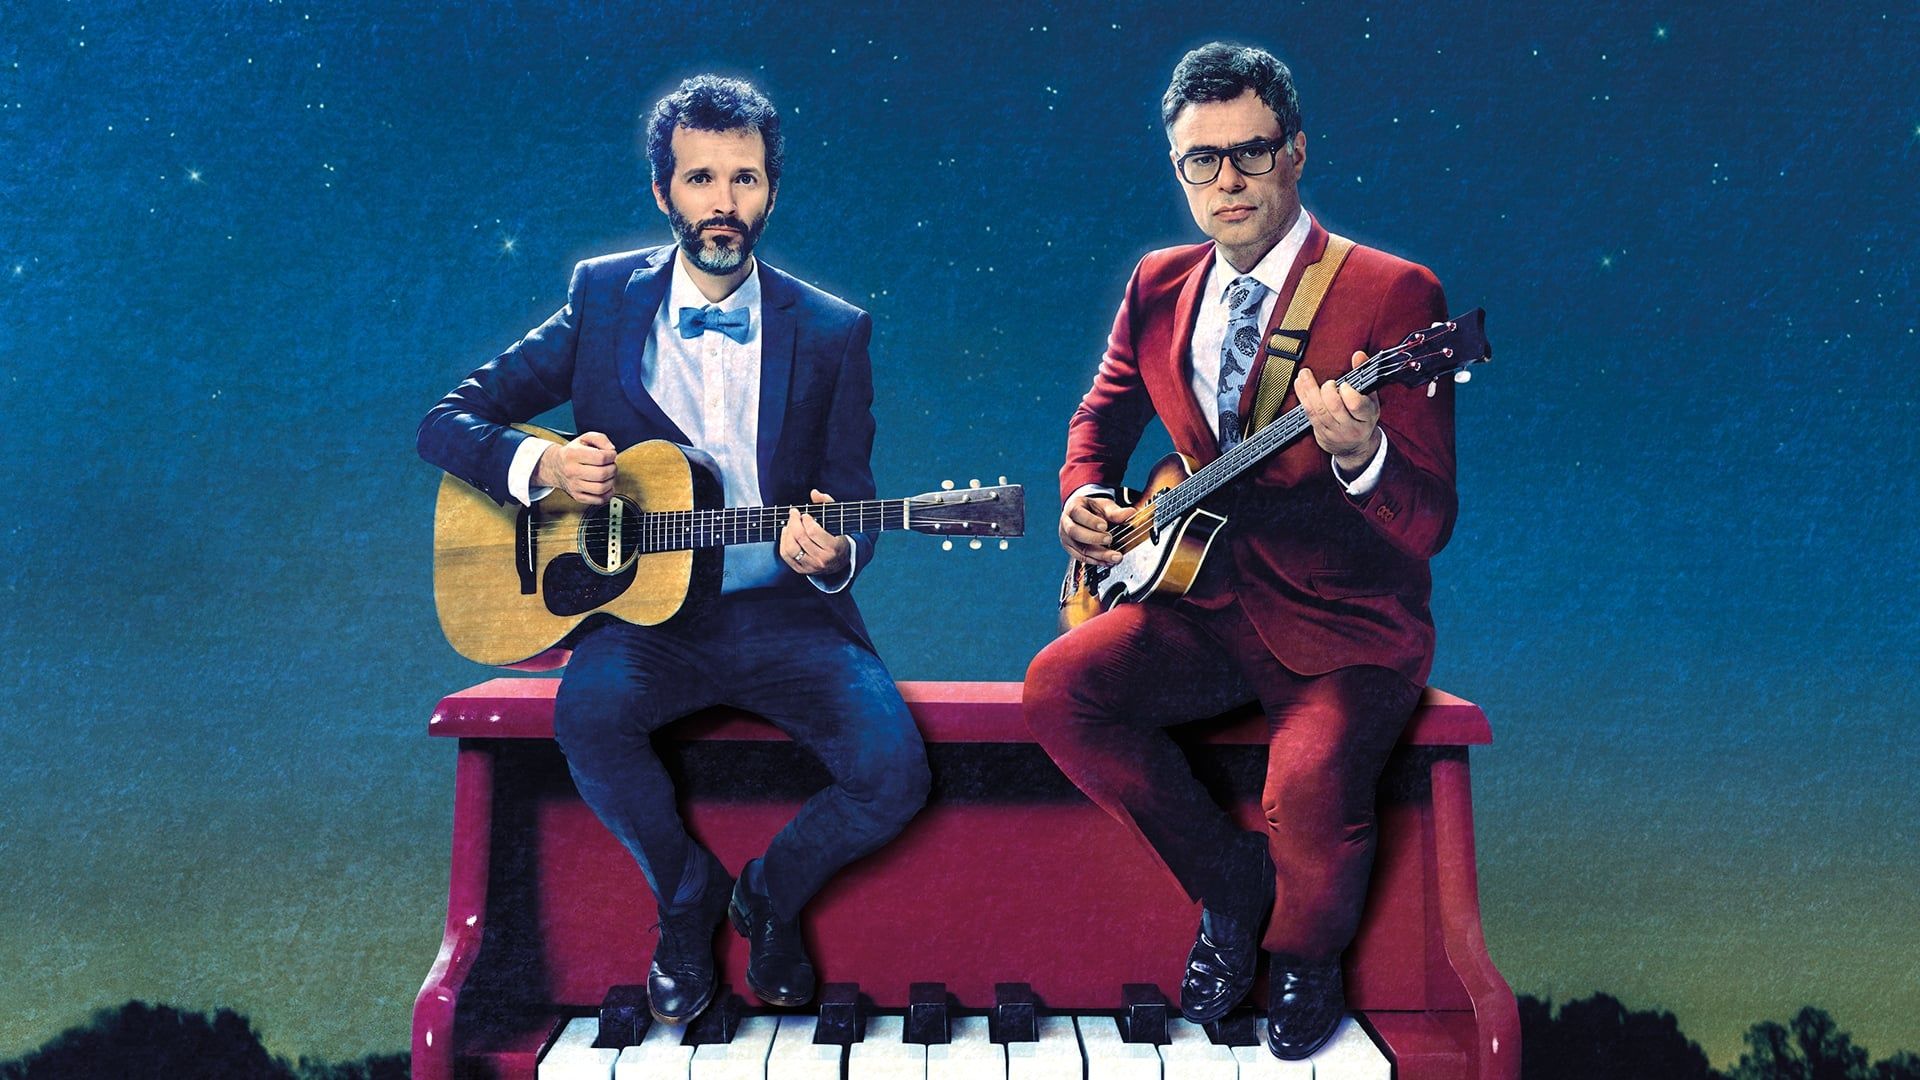 Flight of the Conchords: Live in London Backdrop